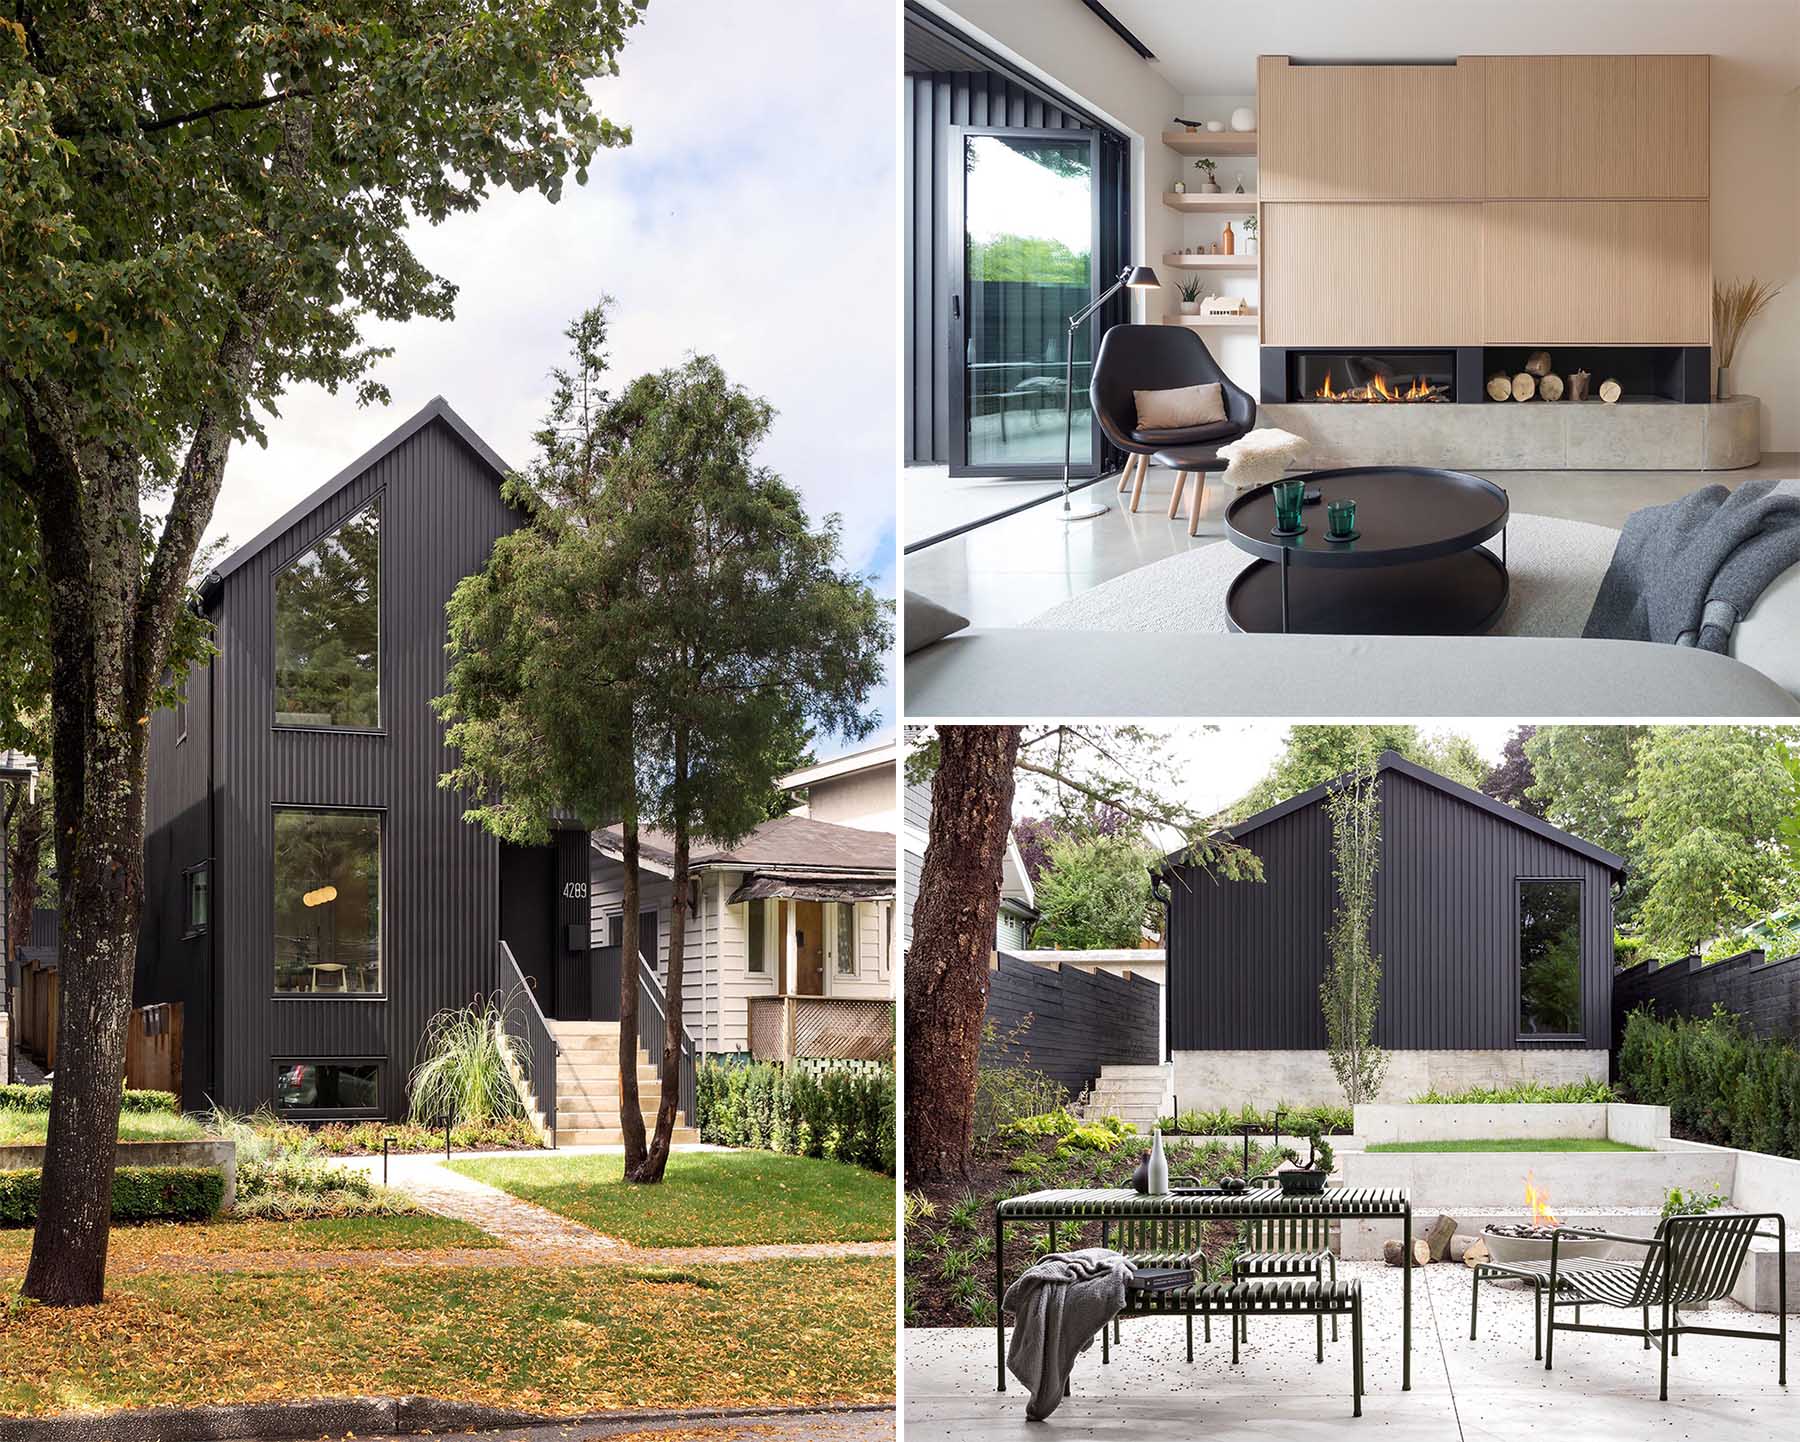 A modern tall and narrow house with a black exterior and an interior with light wood accents.